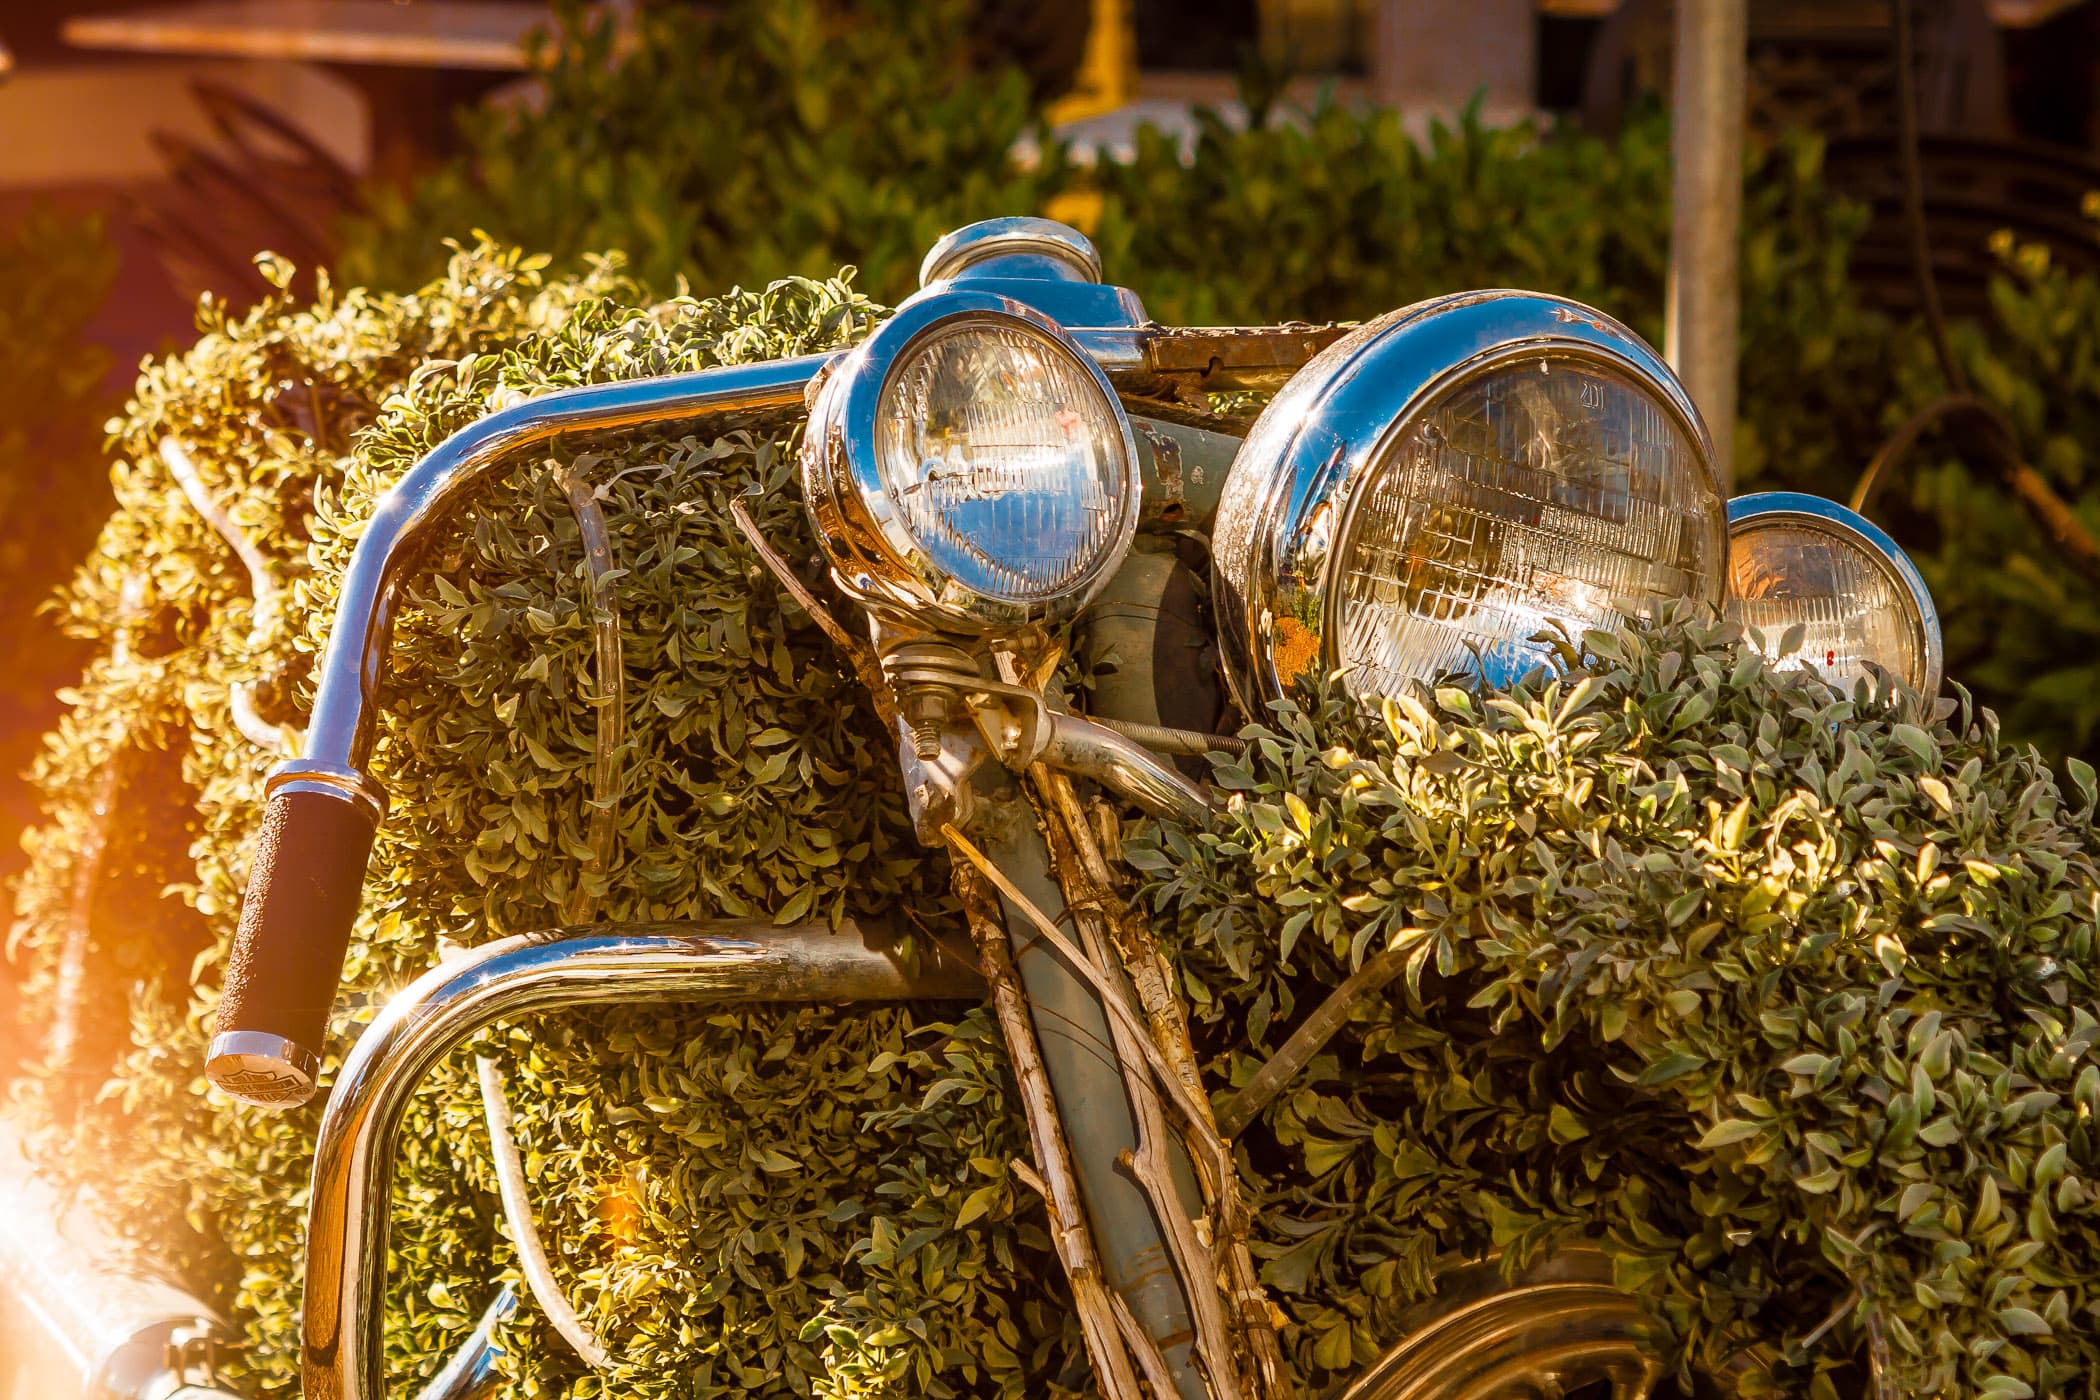 A motorcycle covered with vines at the Harley-Davidson Bar and Grill, Las Vegas.